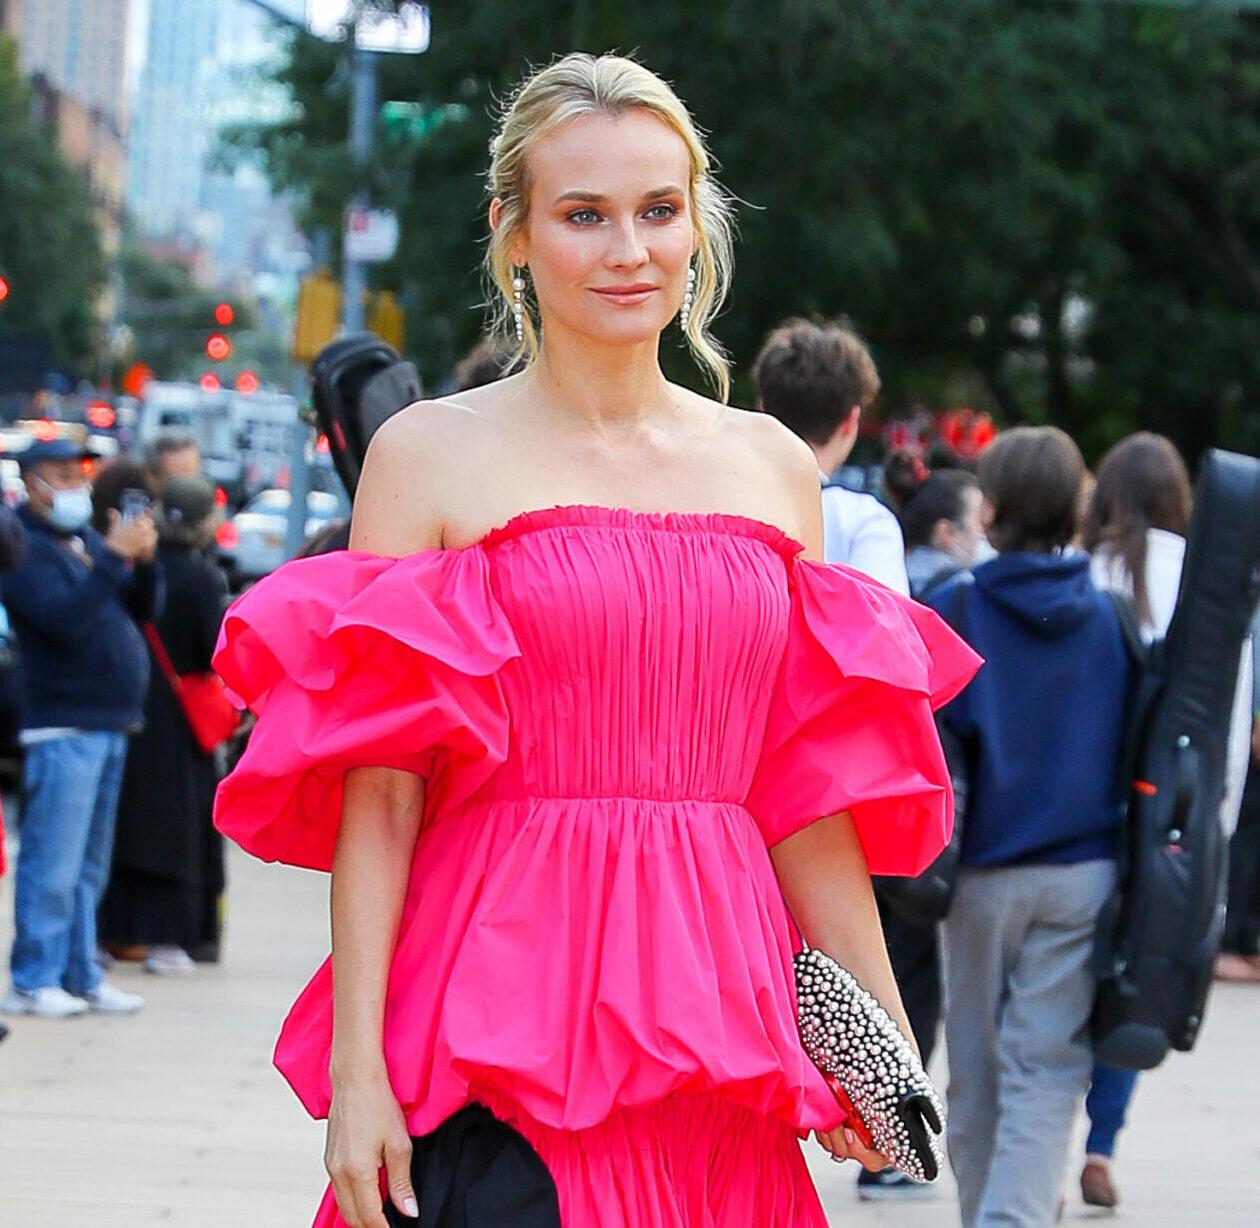 Diane Kruger looks radiant in a bright pink gown in NYC on Sep 30 2021